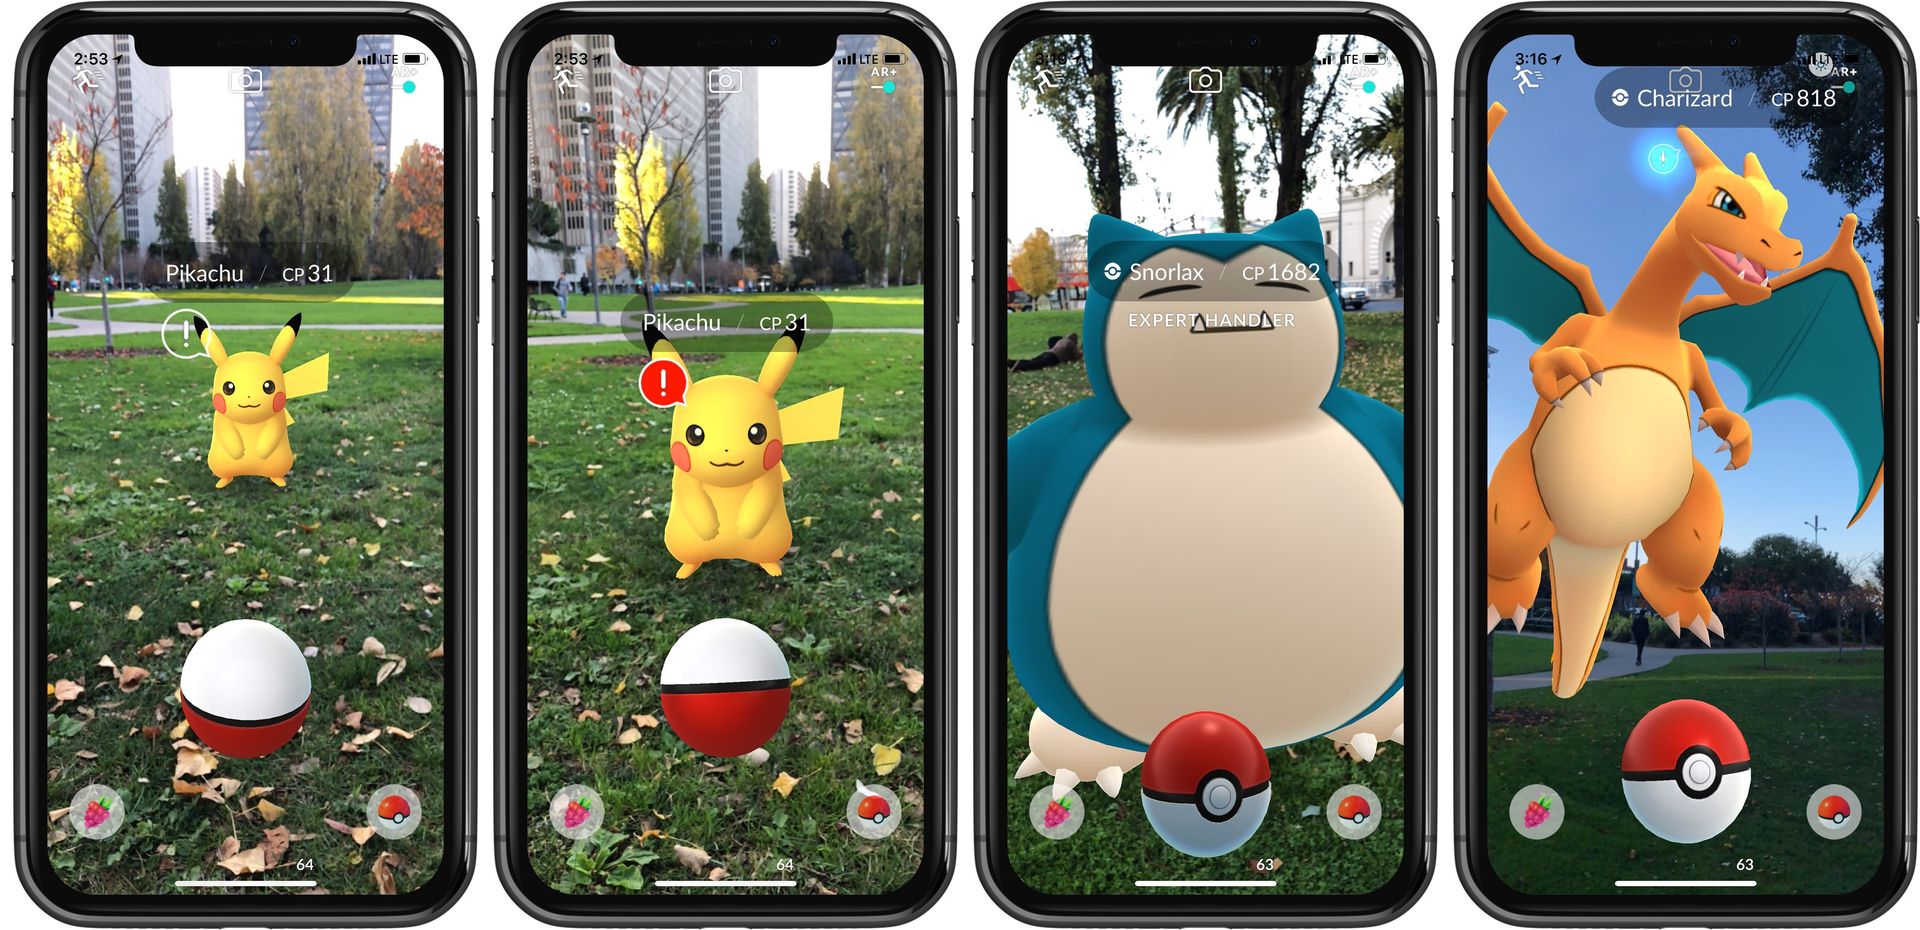 How is a game like Pokemon Go an example of augmented reality?